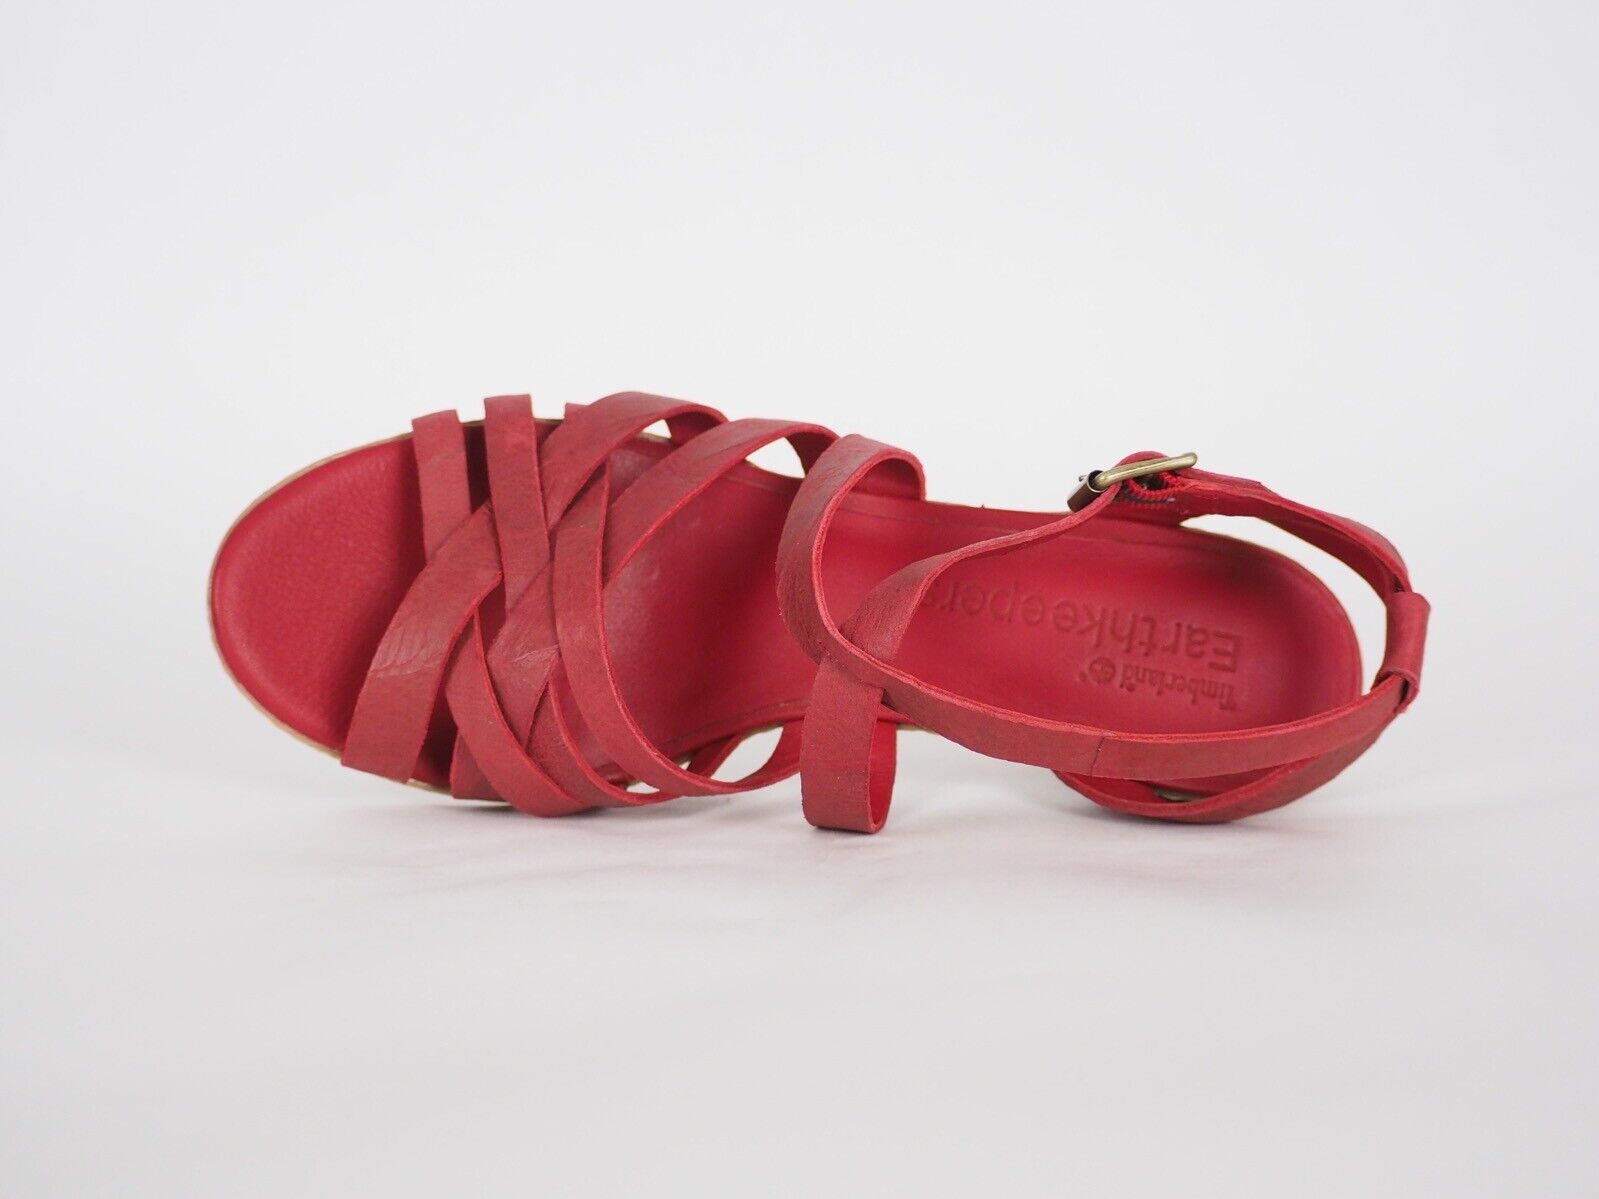 Womens Timberland EK 27690 Red Leather High Heel Summer Casual Strappy Sandals